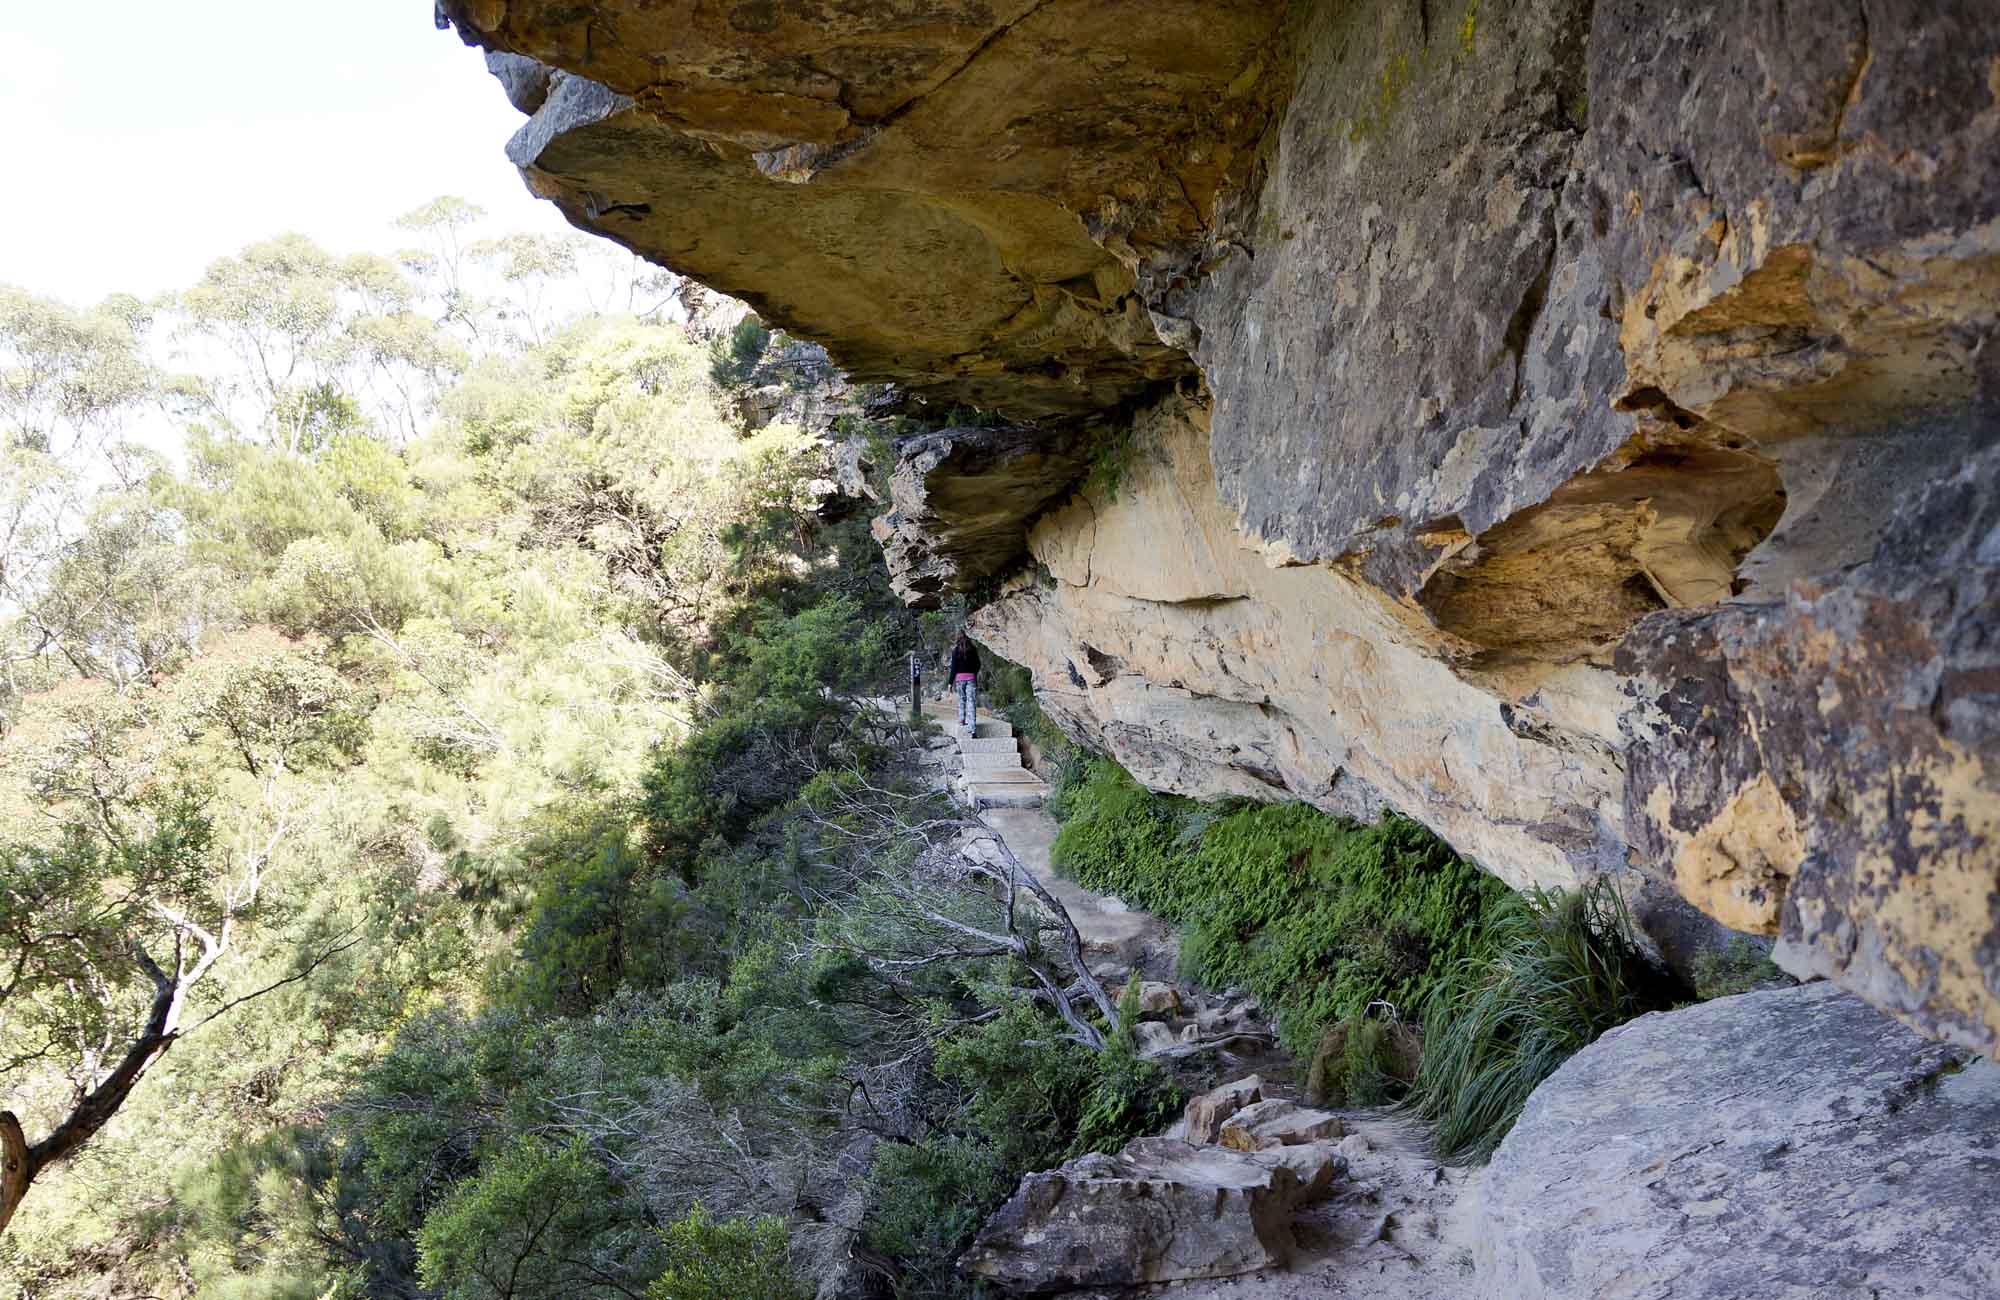 Overcliff-Undercliff track, Blue Mountains National Park. Photo: Steve Alton/OEH